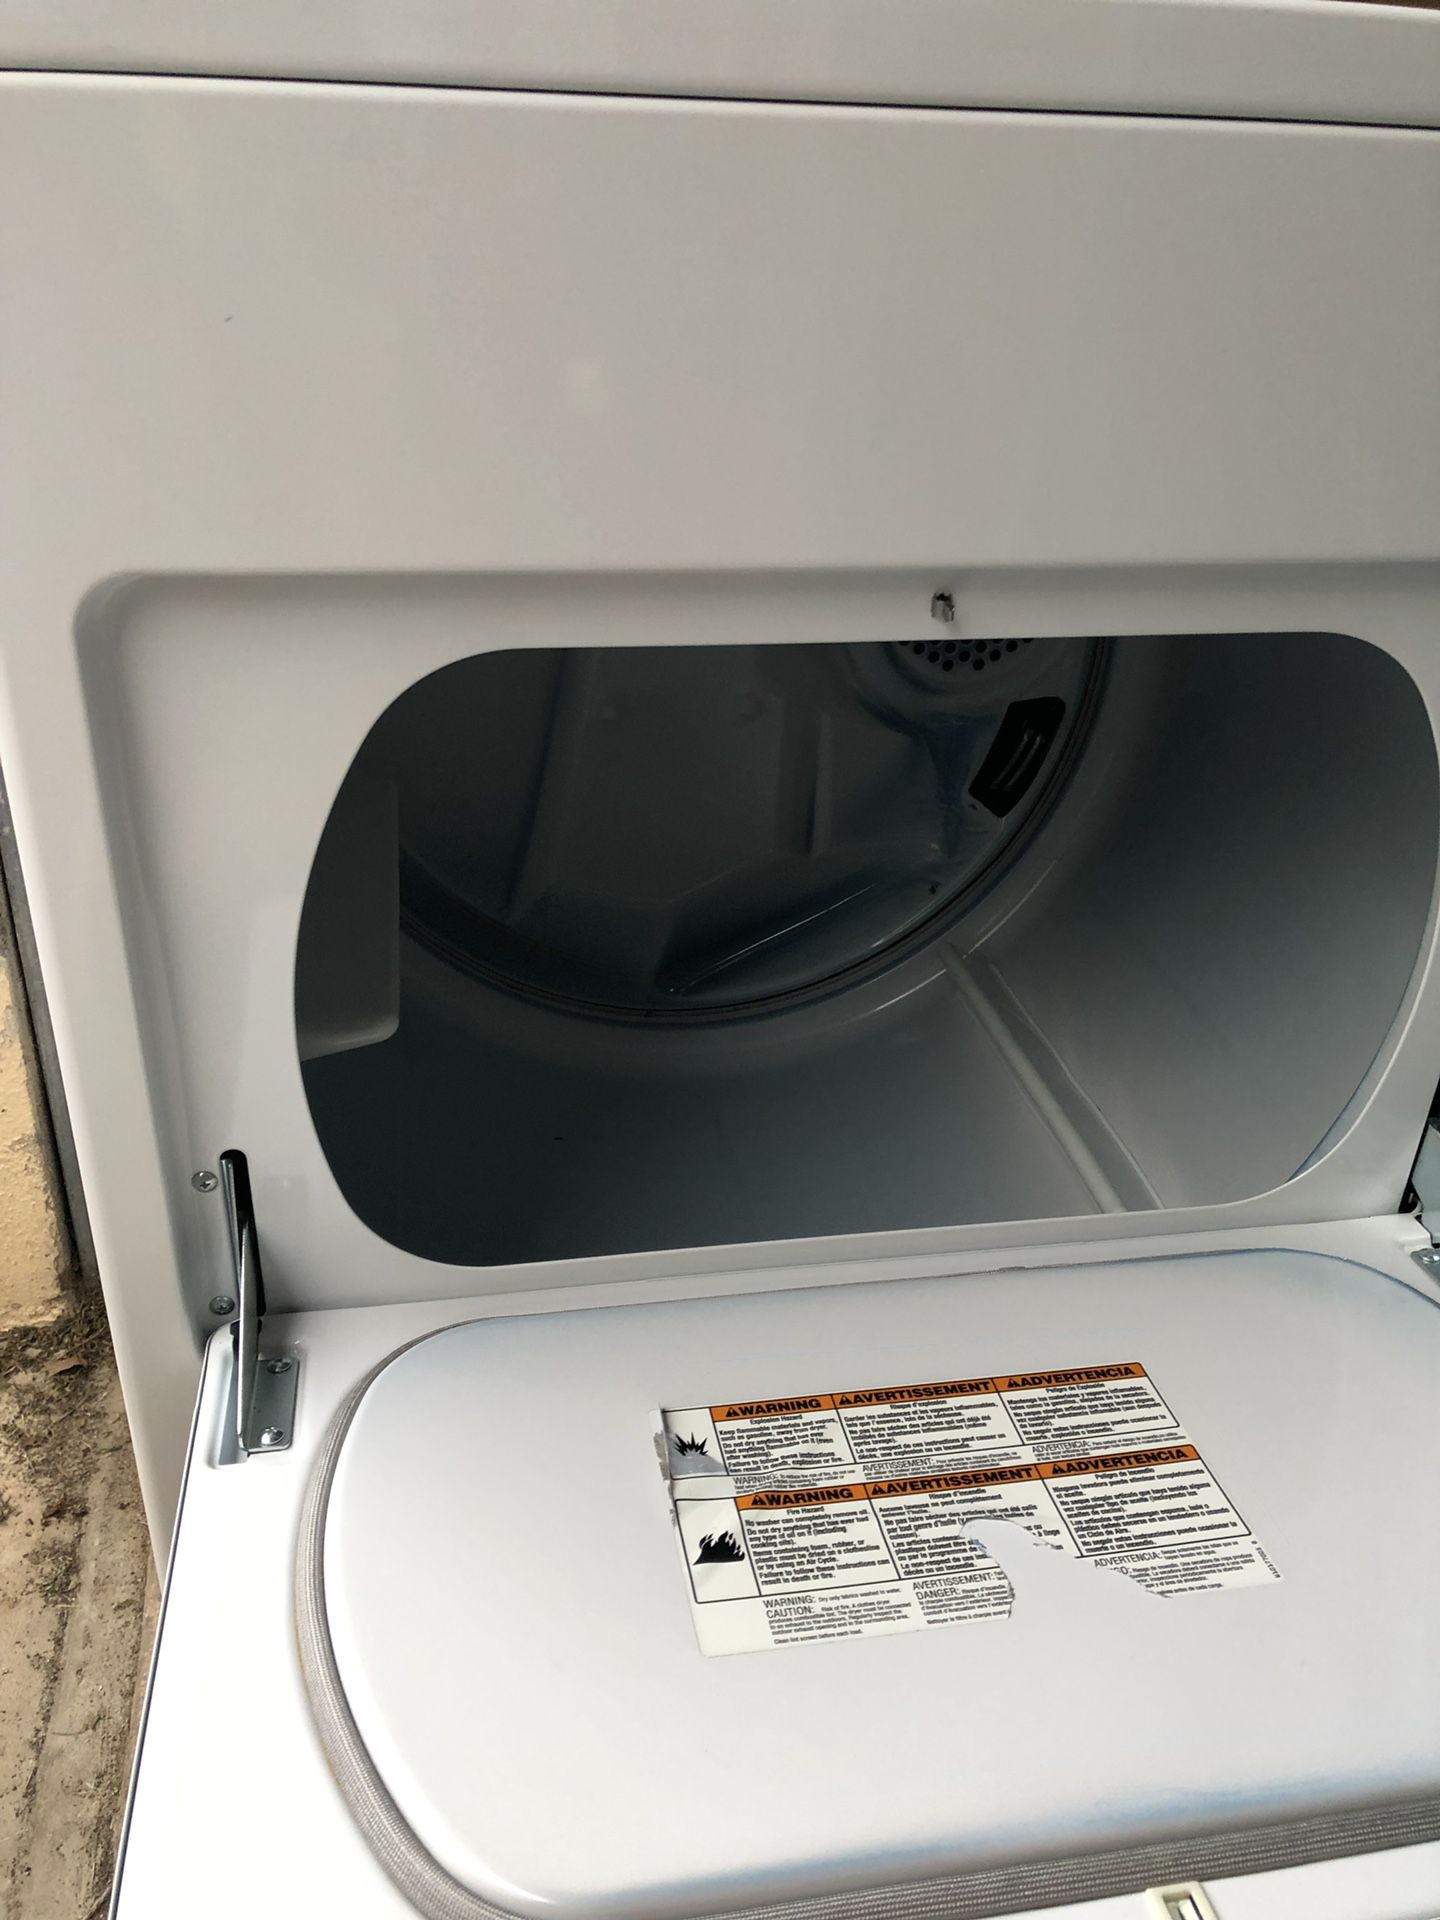 Whirlpool washer and dryer look great